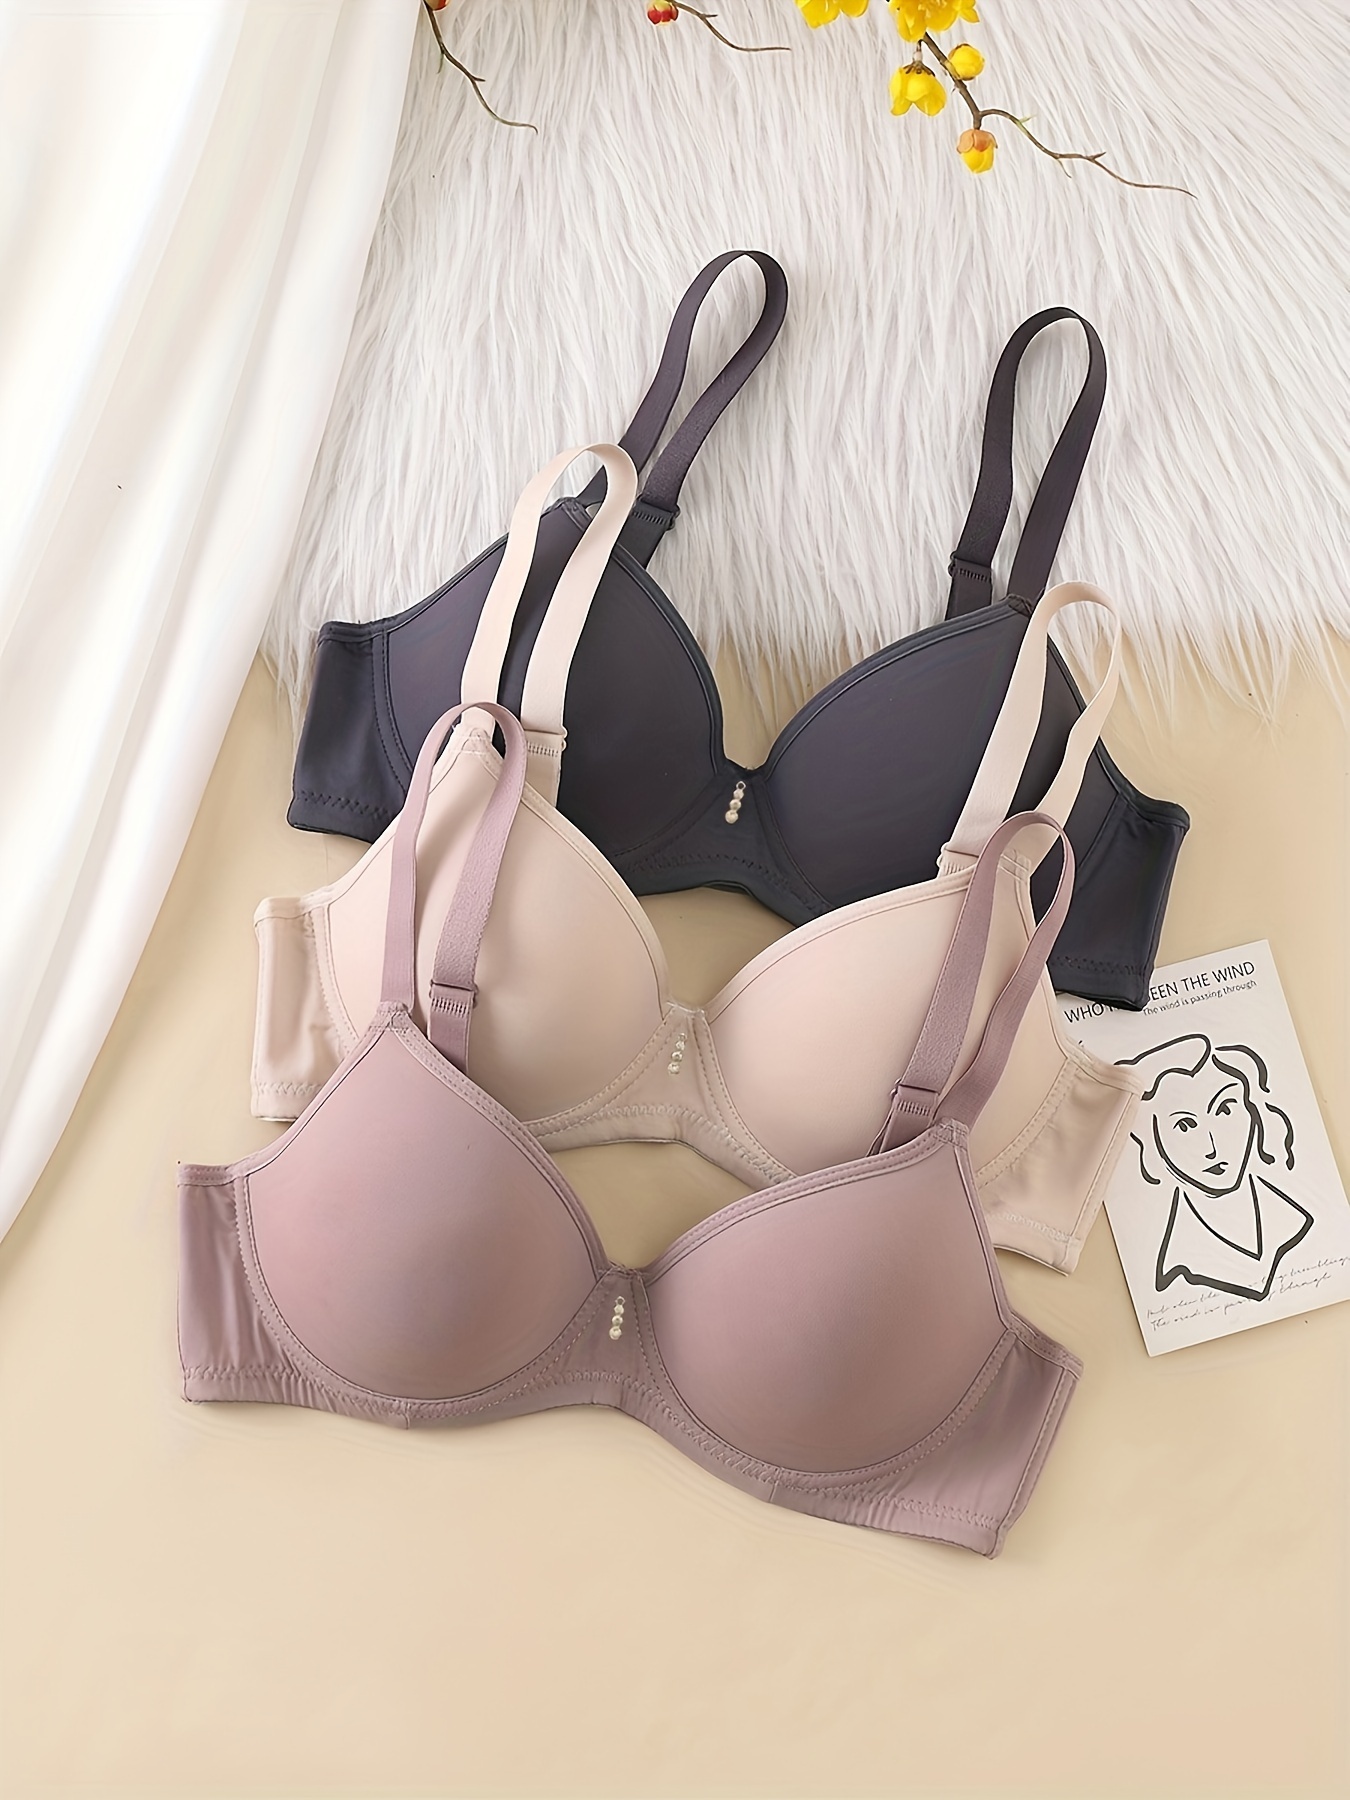 Women's T Shirt Bra with Push up Padded Bralette Bra Without Underwire  Seamless Comfortable Soft Cup Bra Bras for Women 80D